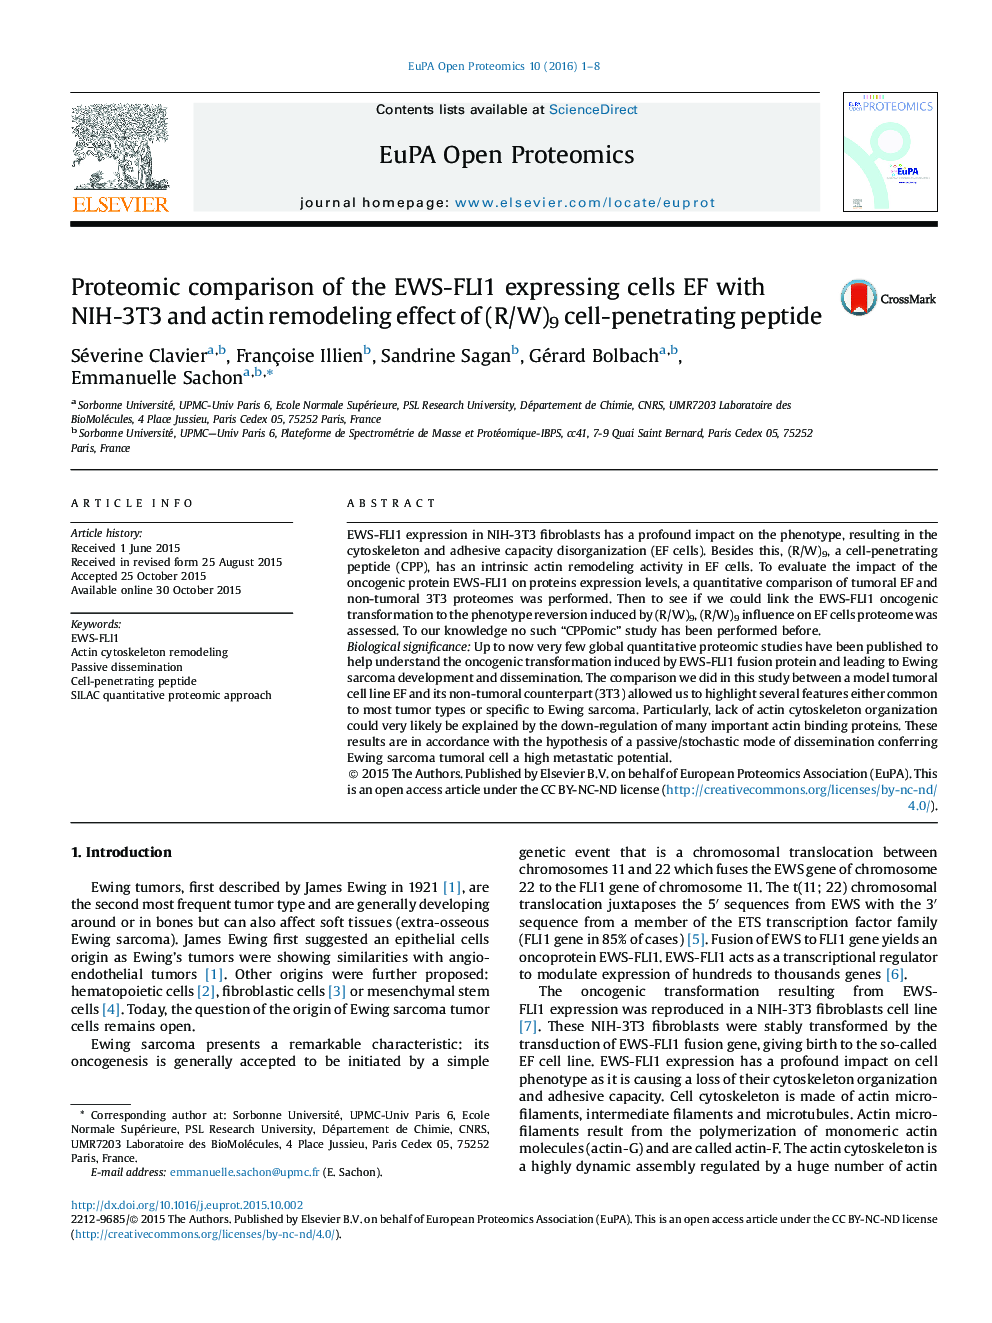 Proteomic comparison of the EWS-FLI1 expressing cells EF with NIH-3T3 and actin remodeling effect of (R/W)9 cell-penetrating peptide